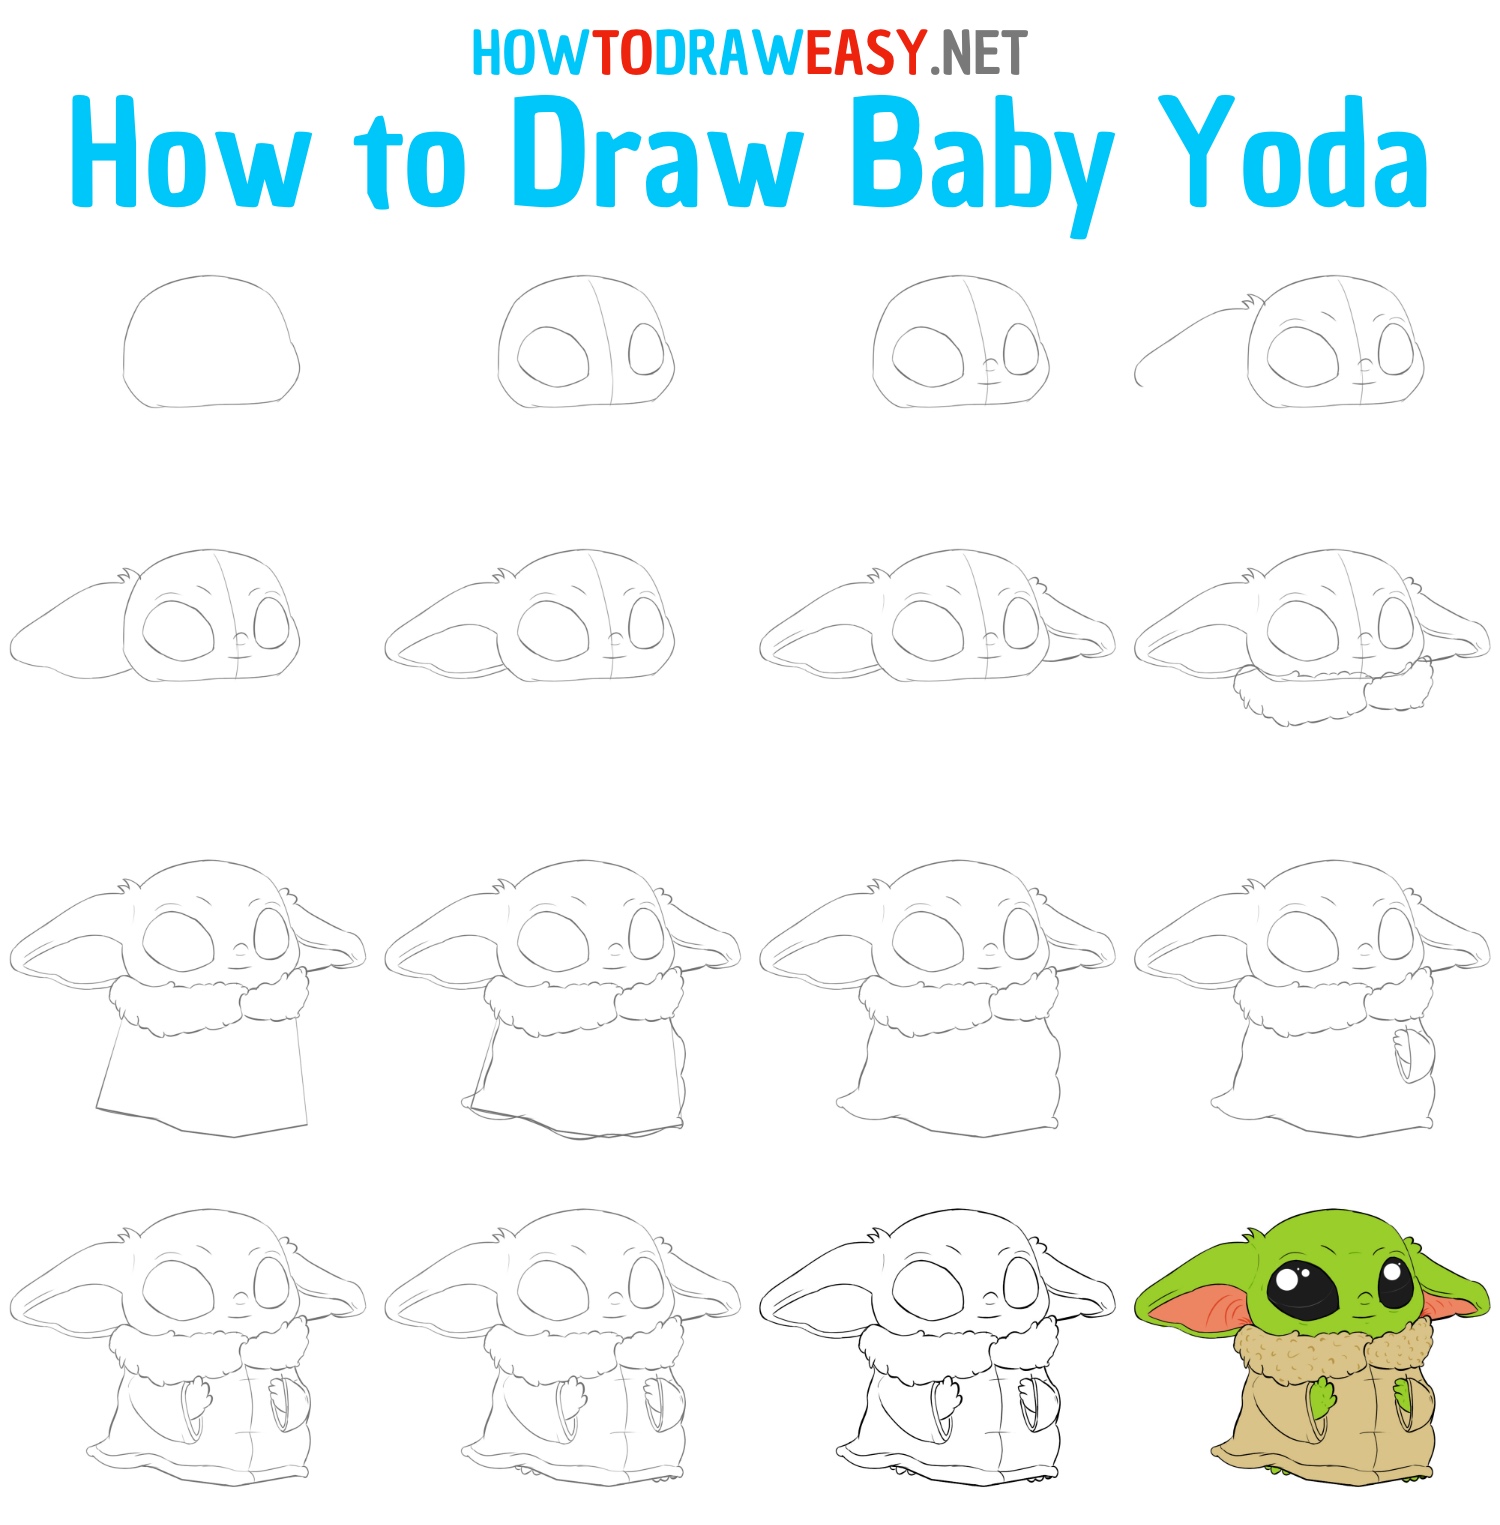 How to Draw Baby Yoda Step by Step